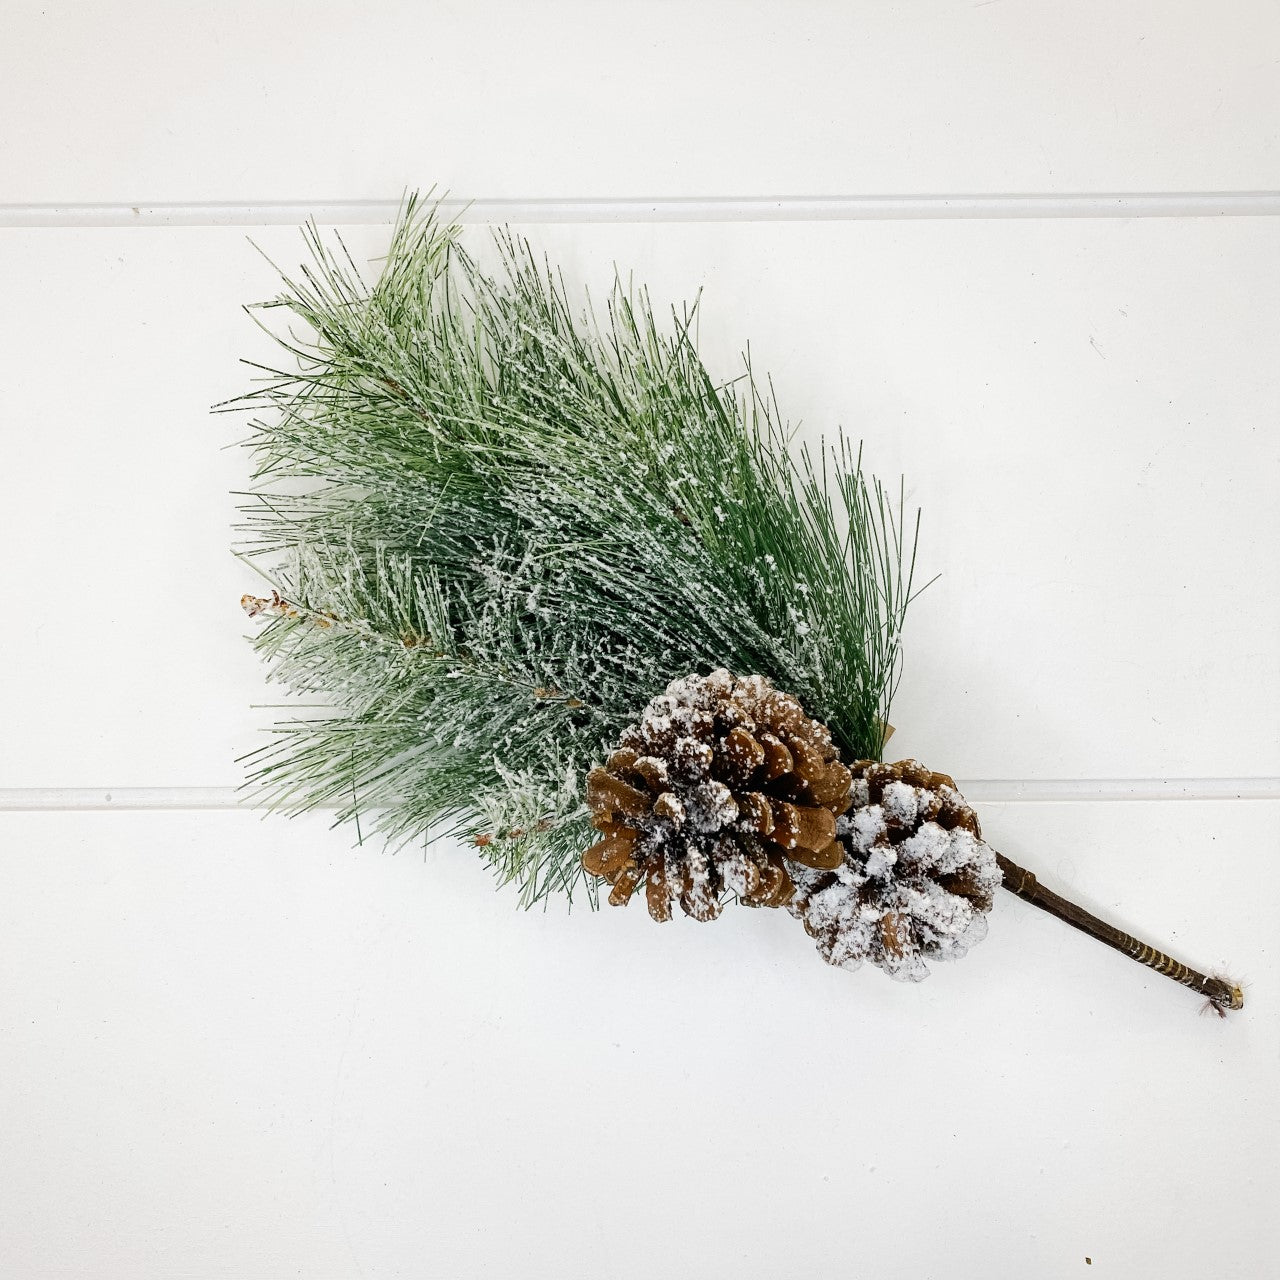 GREEN 15"H SNOW MIXED NEEDLE PINE PICK with PINE CONES